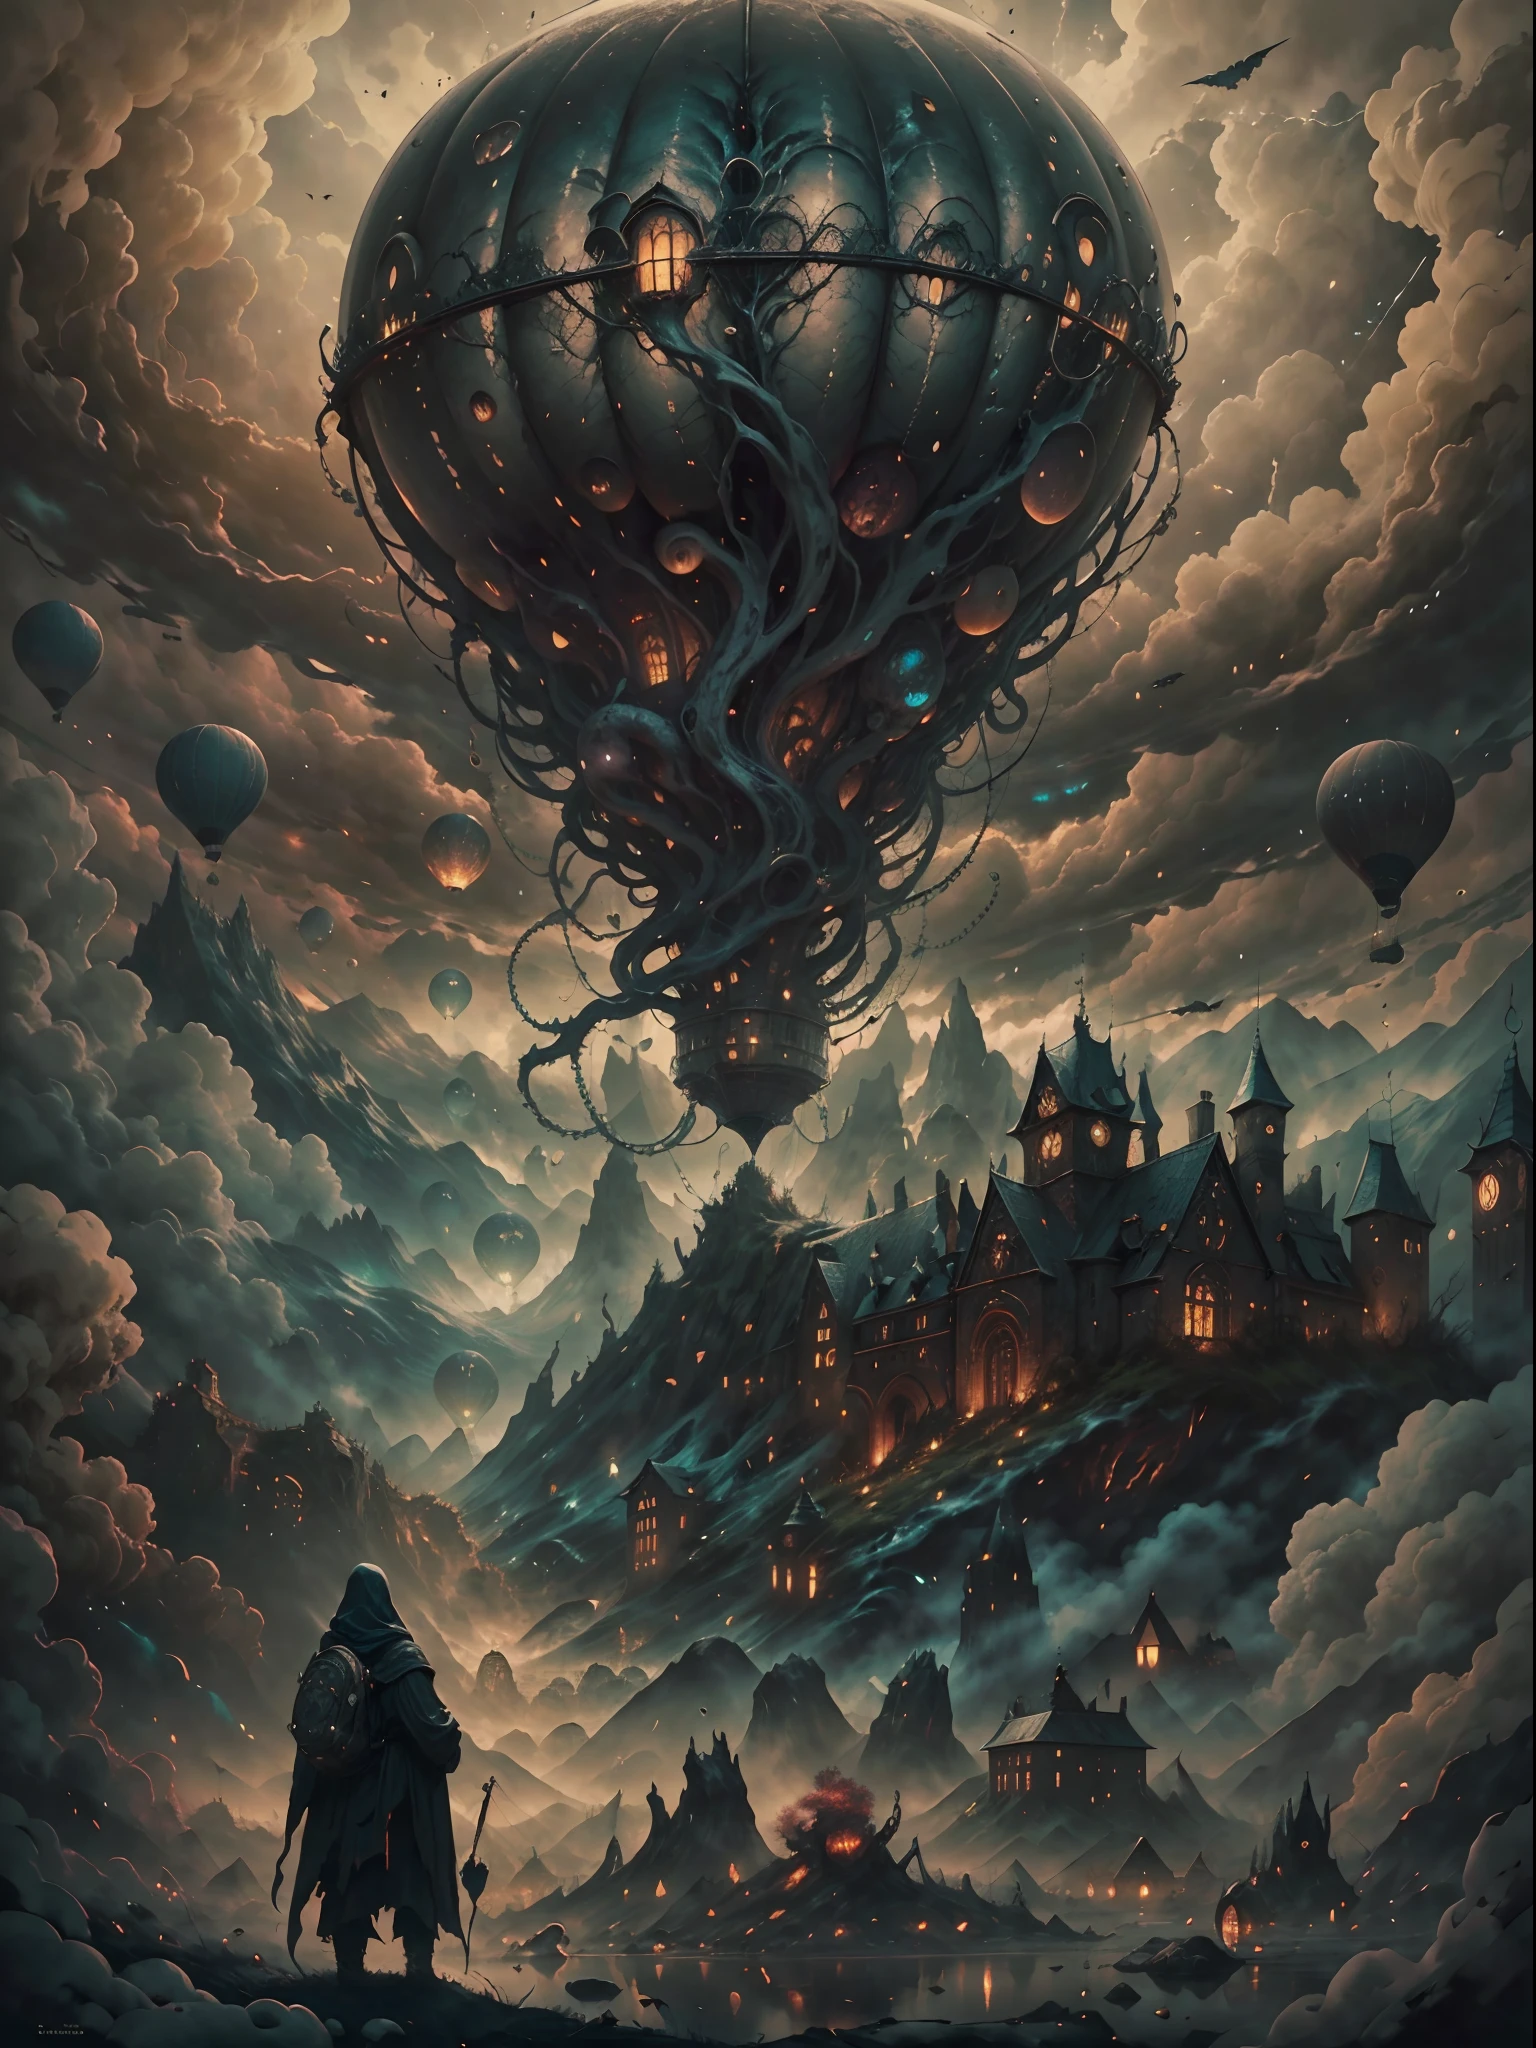 (best quality,highres,masterpiece:1.2),close shot image,giant hot air balloon,(HP.lovecraft style),(vivid colors,dark and mysterious atmosphere),ominous tentacles,floating in the sky,gloomy clouds,misty background,eerie lighting,lovecraftian details,elaborate design,attention to fine details,highly-detailed textures,menacing presence,otherworldly,unearthly landscape,disturbing beauty,intense atmosphere,magical realism,subtle surrealism,ethereal feeling,nostalgic elements,unusual perspective,dark fantasy,gothic horror elements,hauntingly beautiful composition,whimsical yet foreboding ambiance,labyrinthine structures,mysterious symbols,shadows and silhouettes,majestic and intimidating,awe-inspiring,grandiose scale,awe-inducing,sublime and surreal,spellbinding,mesmerizing and evocative.